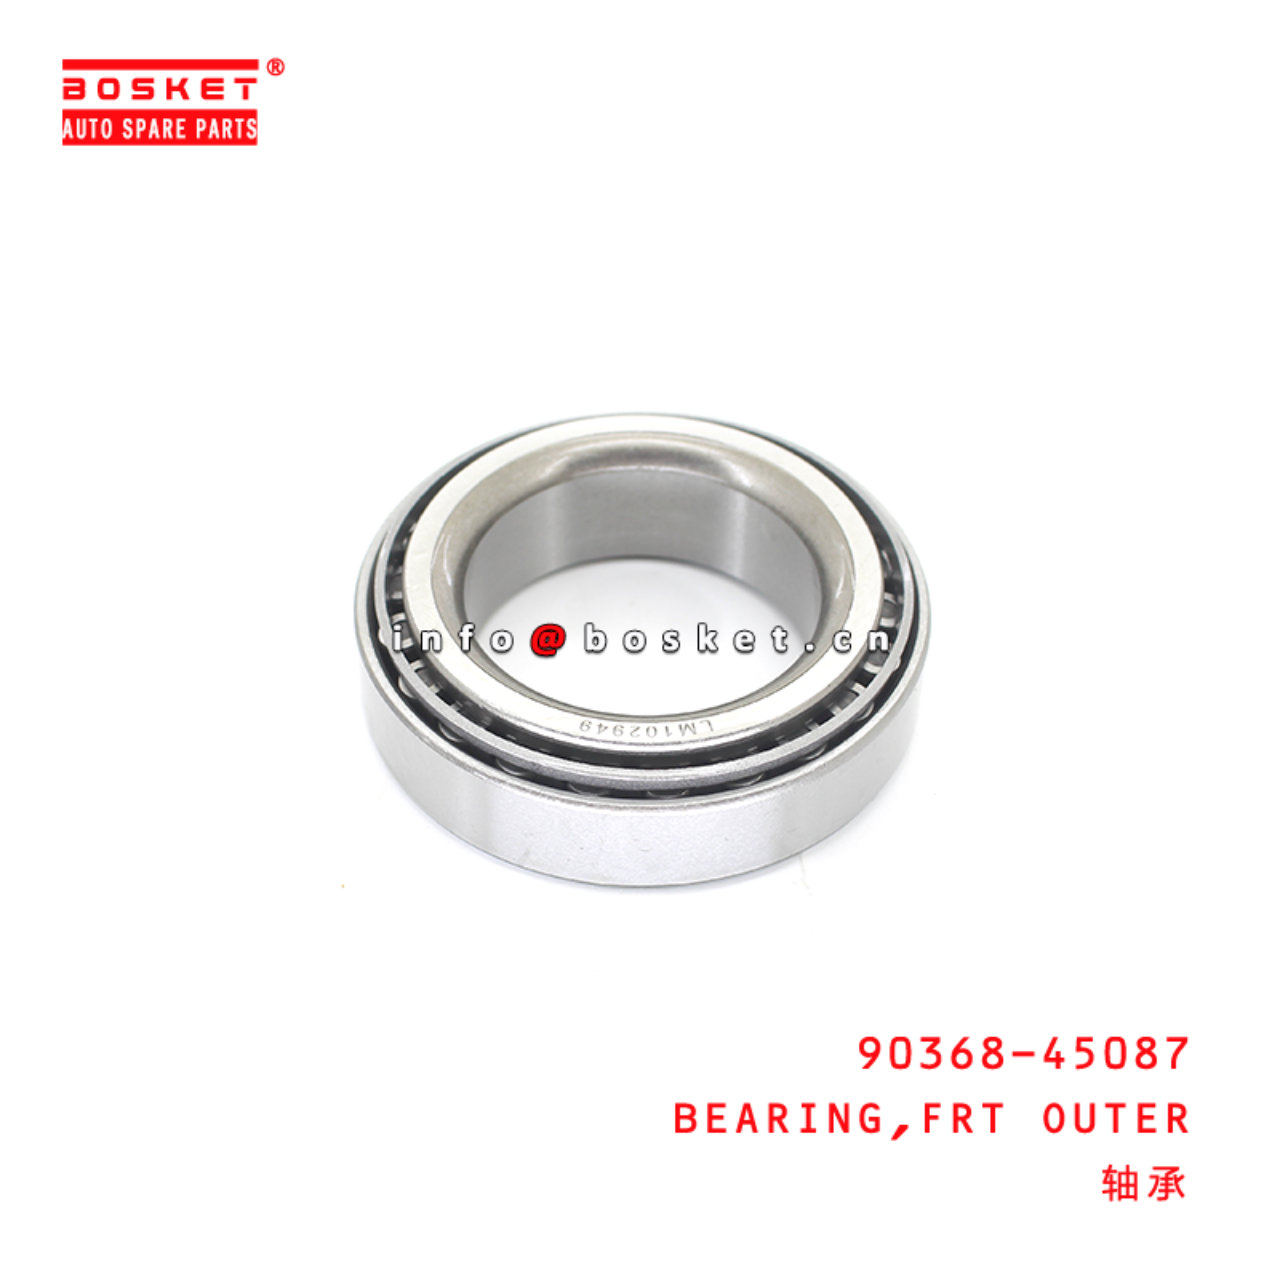 90368-45087 Outer Rear Bearing Suitable for ISUZU HINO700